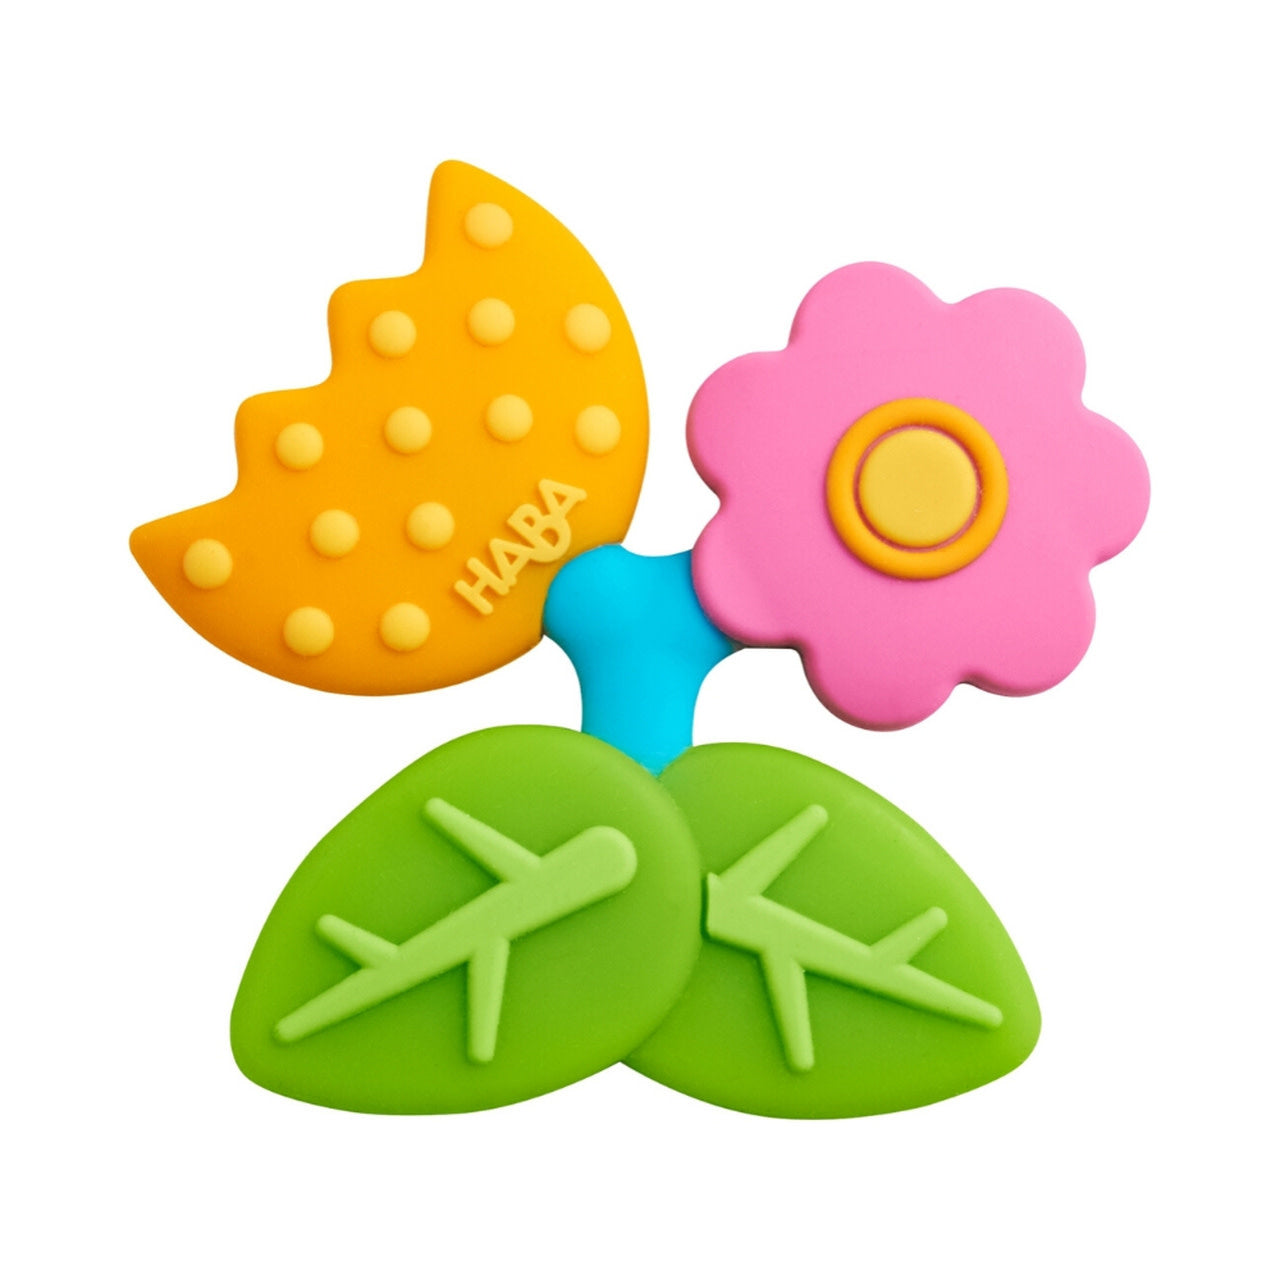 Haba Silicone Clutching Toy